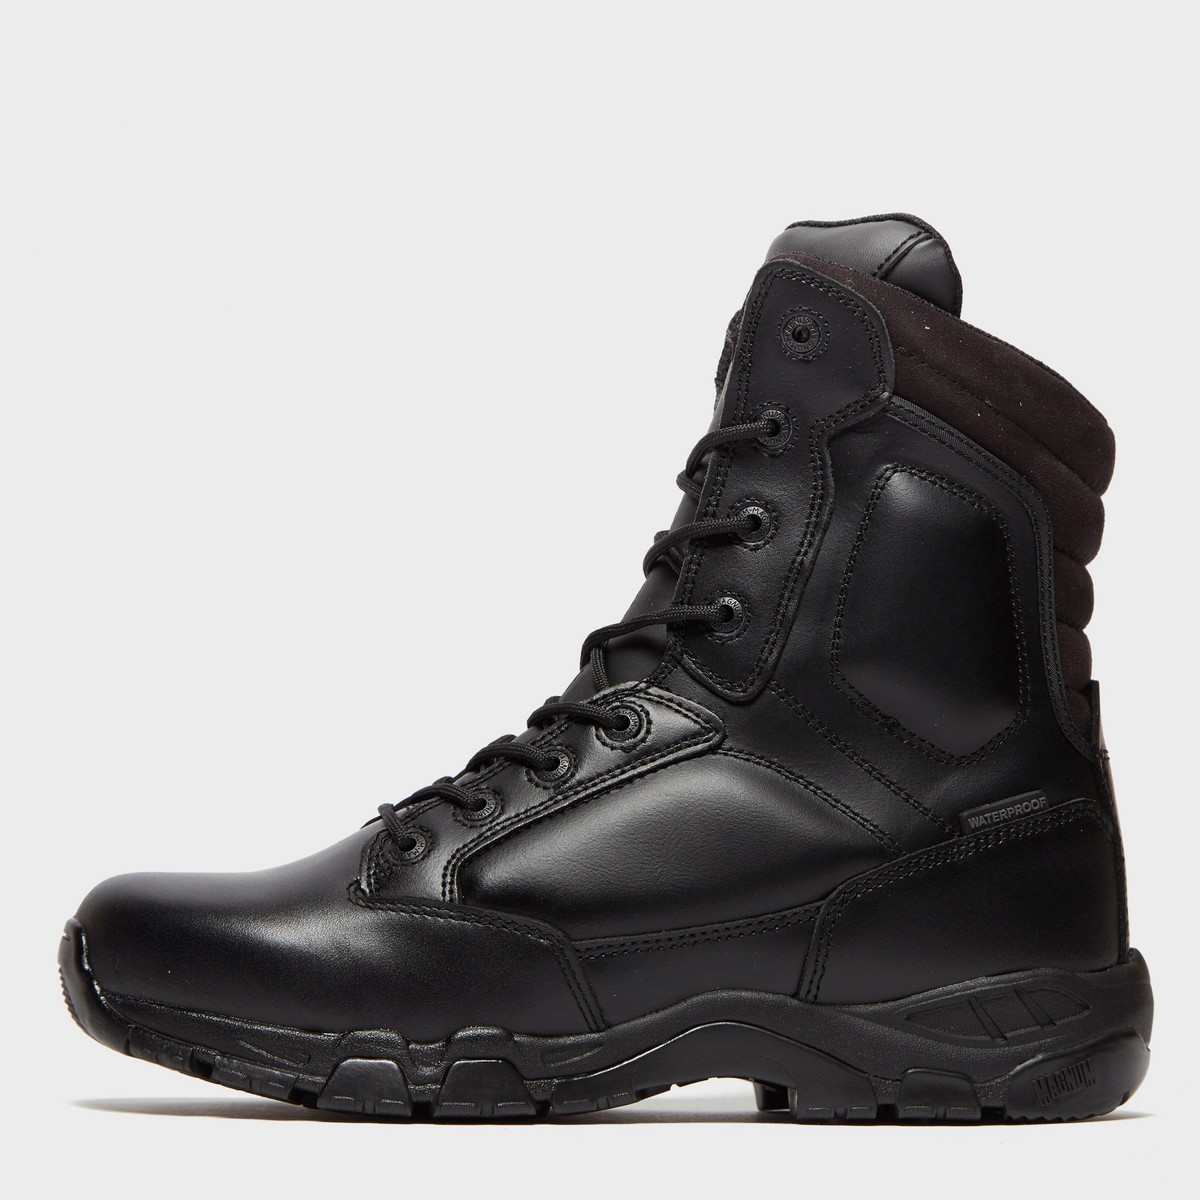 Magnum Viper Pro Waterproof All Leather Boot